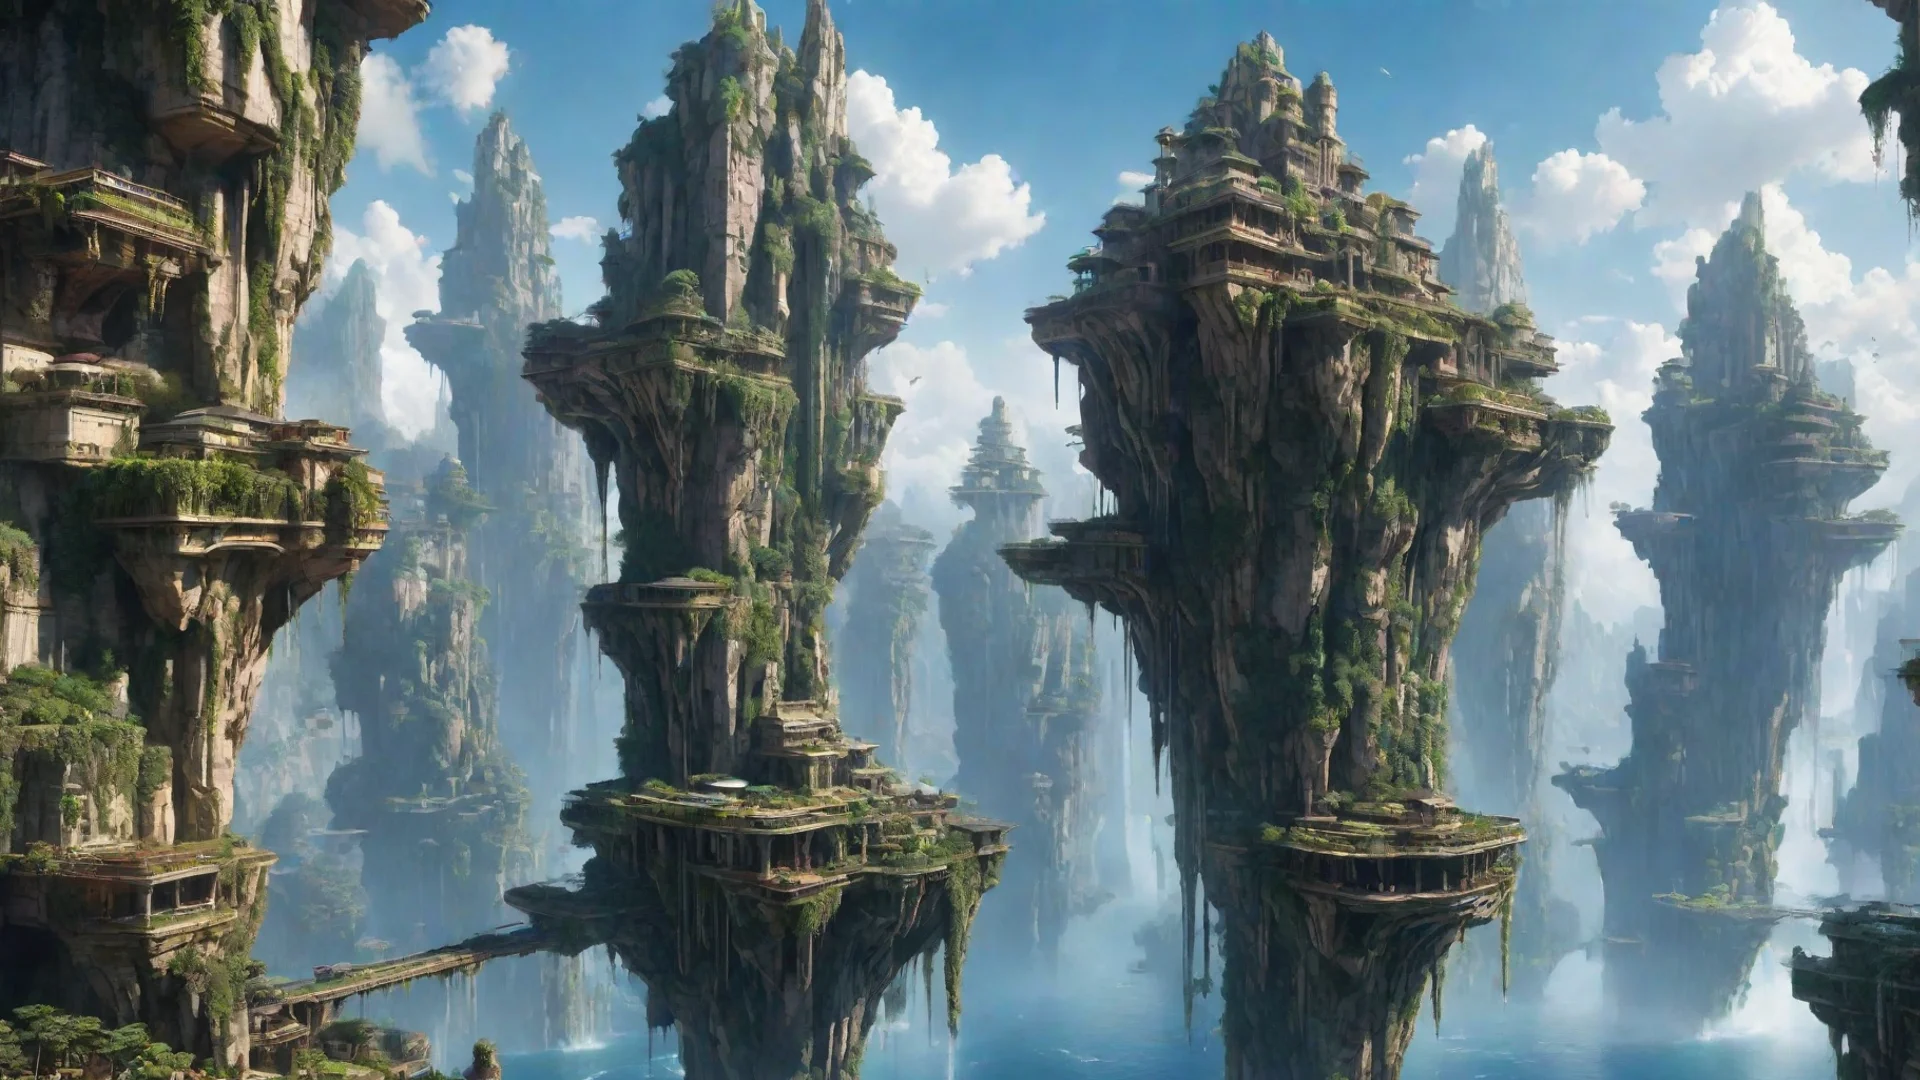 aitrending futuristic city amazing unreal architecture in sky epic floating city on floating cliffs with waterfalls down beautiful sky hanging gardens hd aesthetic good looking fantastic 1 wide